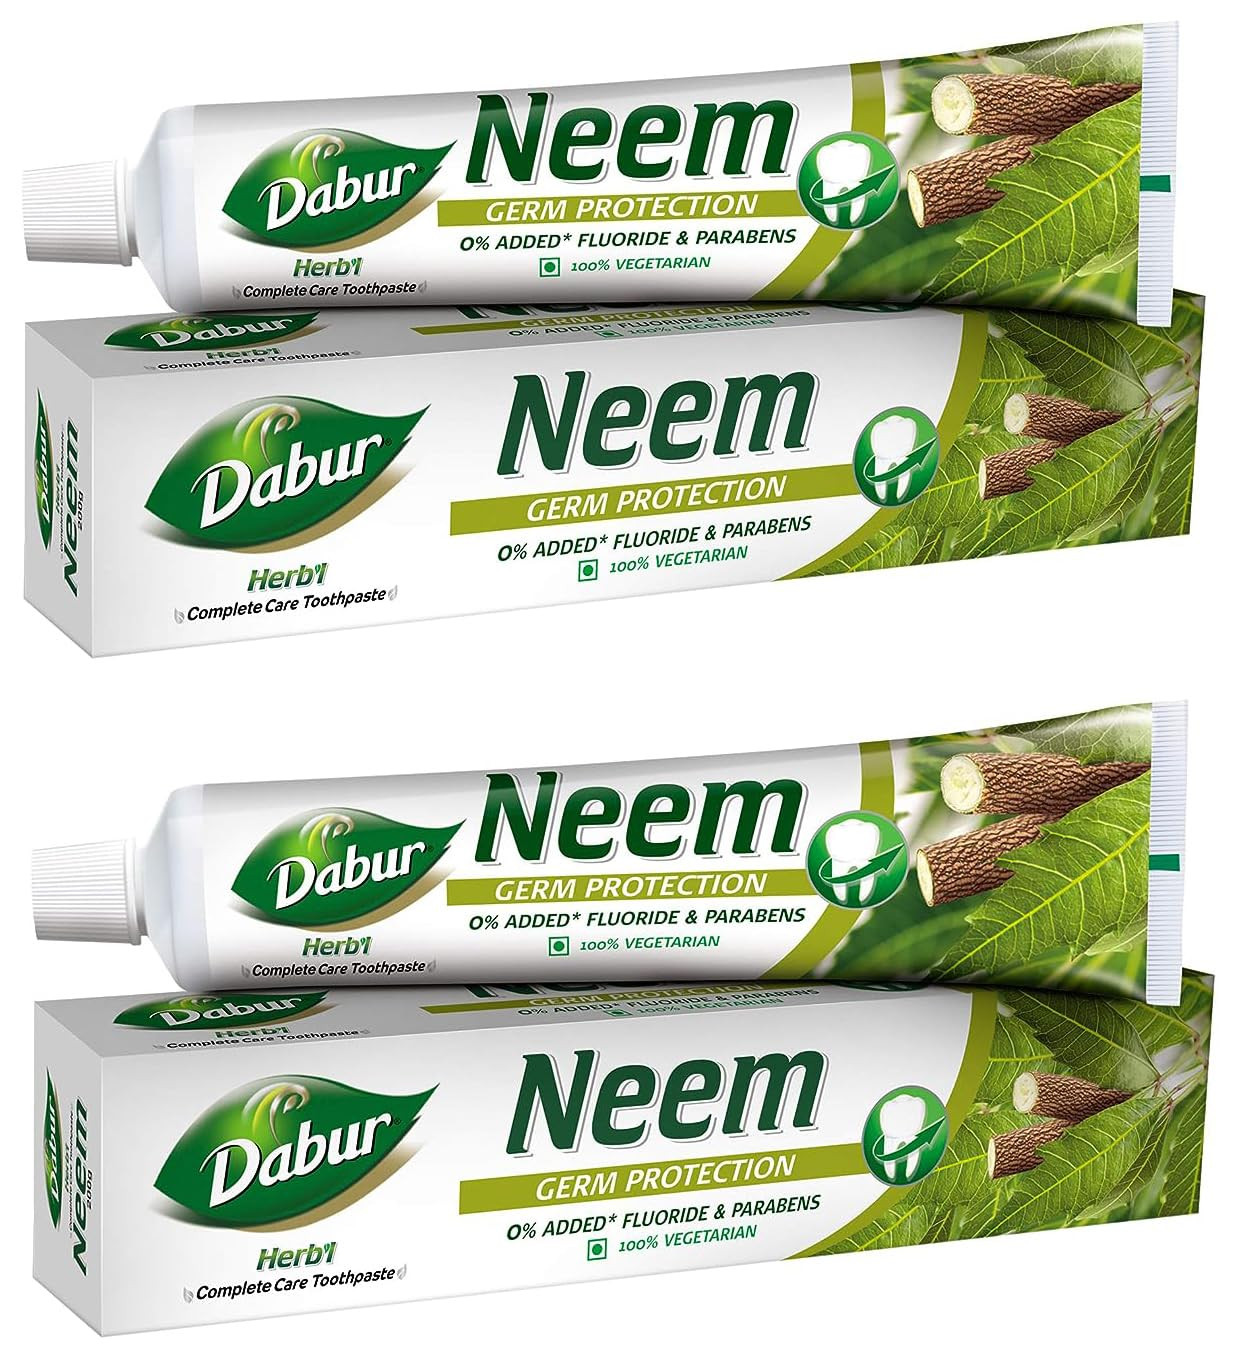 Dabur Herb'l Neem Germ Protection Toothpaste - 200g | No Added Flourides & Parabens | Neem Fights Bacteria (Pack of 2)